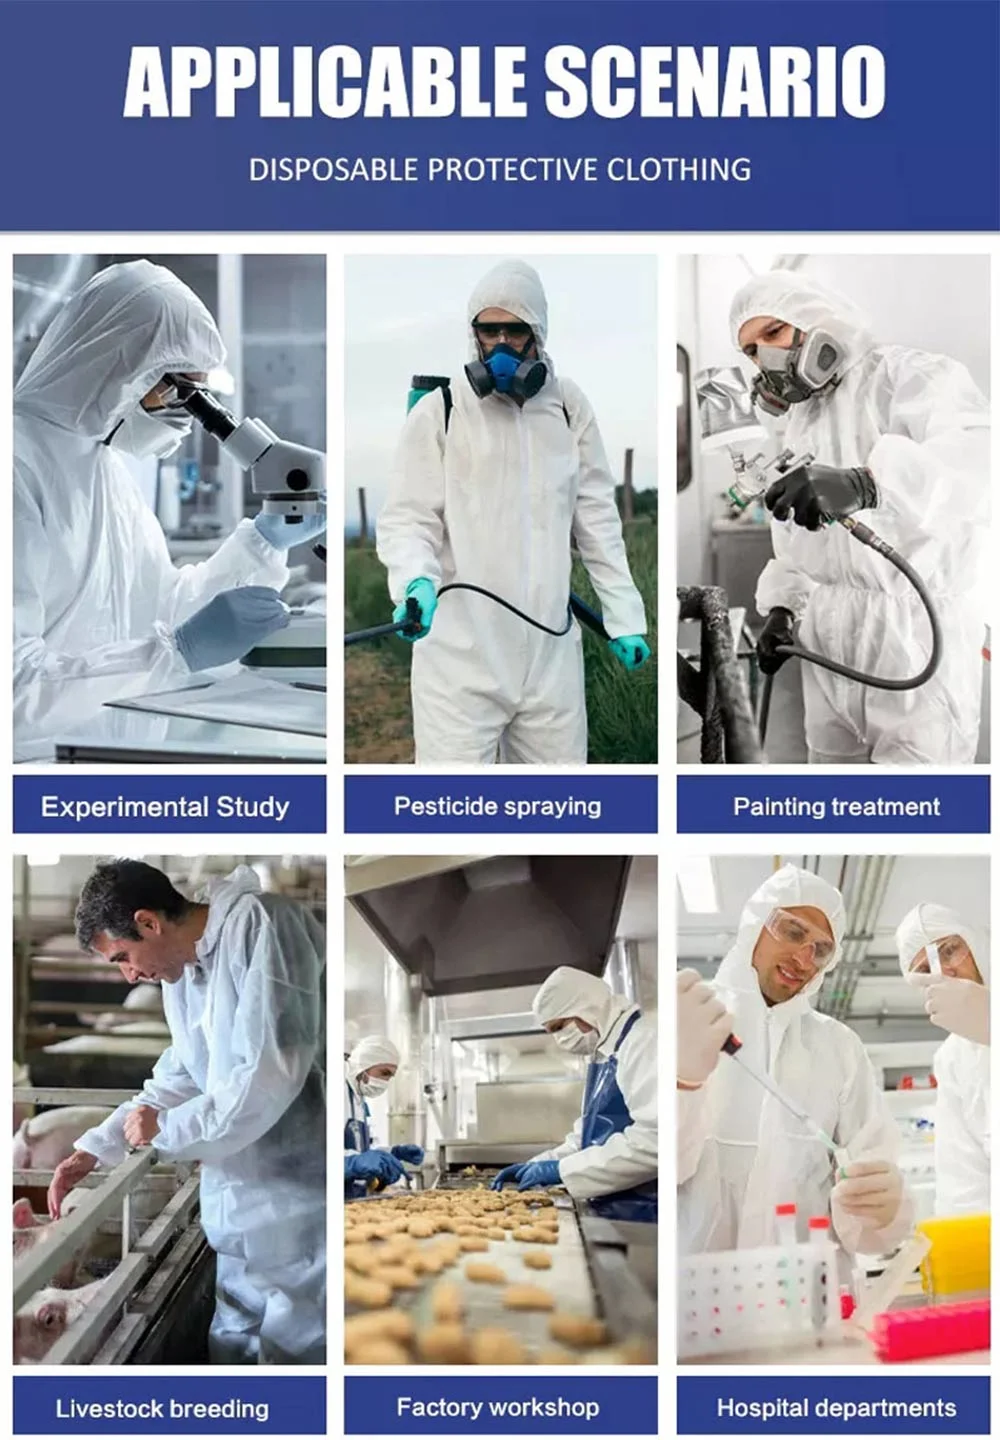 Overall Disposable Against Liquid Splashes SMS Protective Workwear Safety Coverall